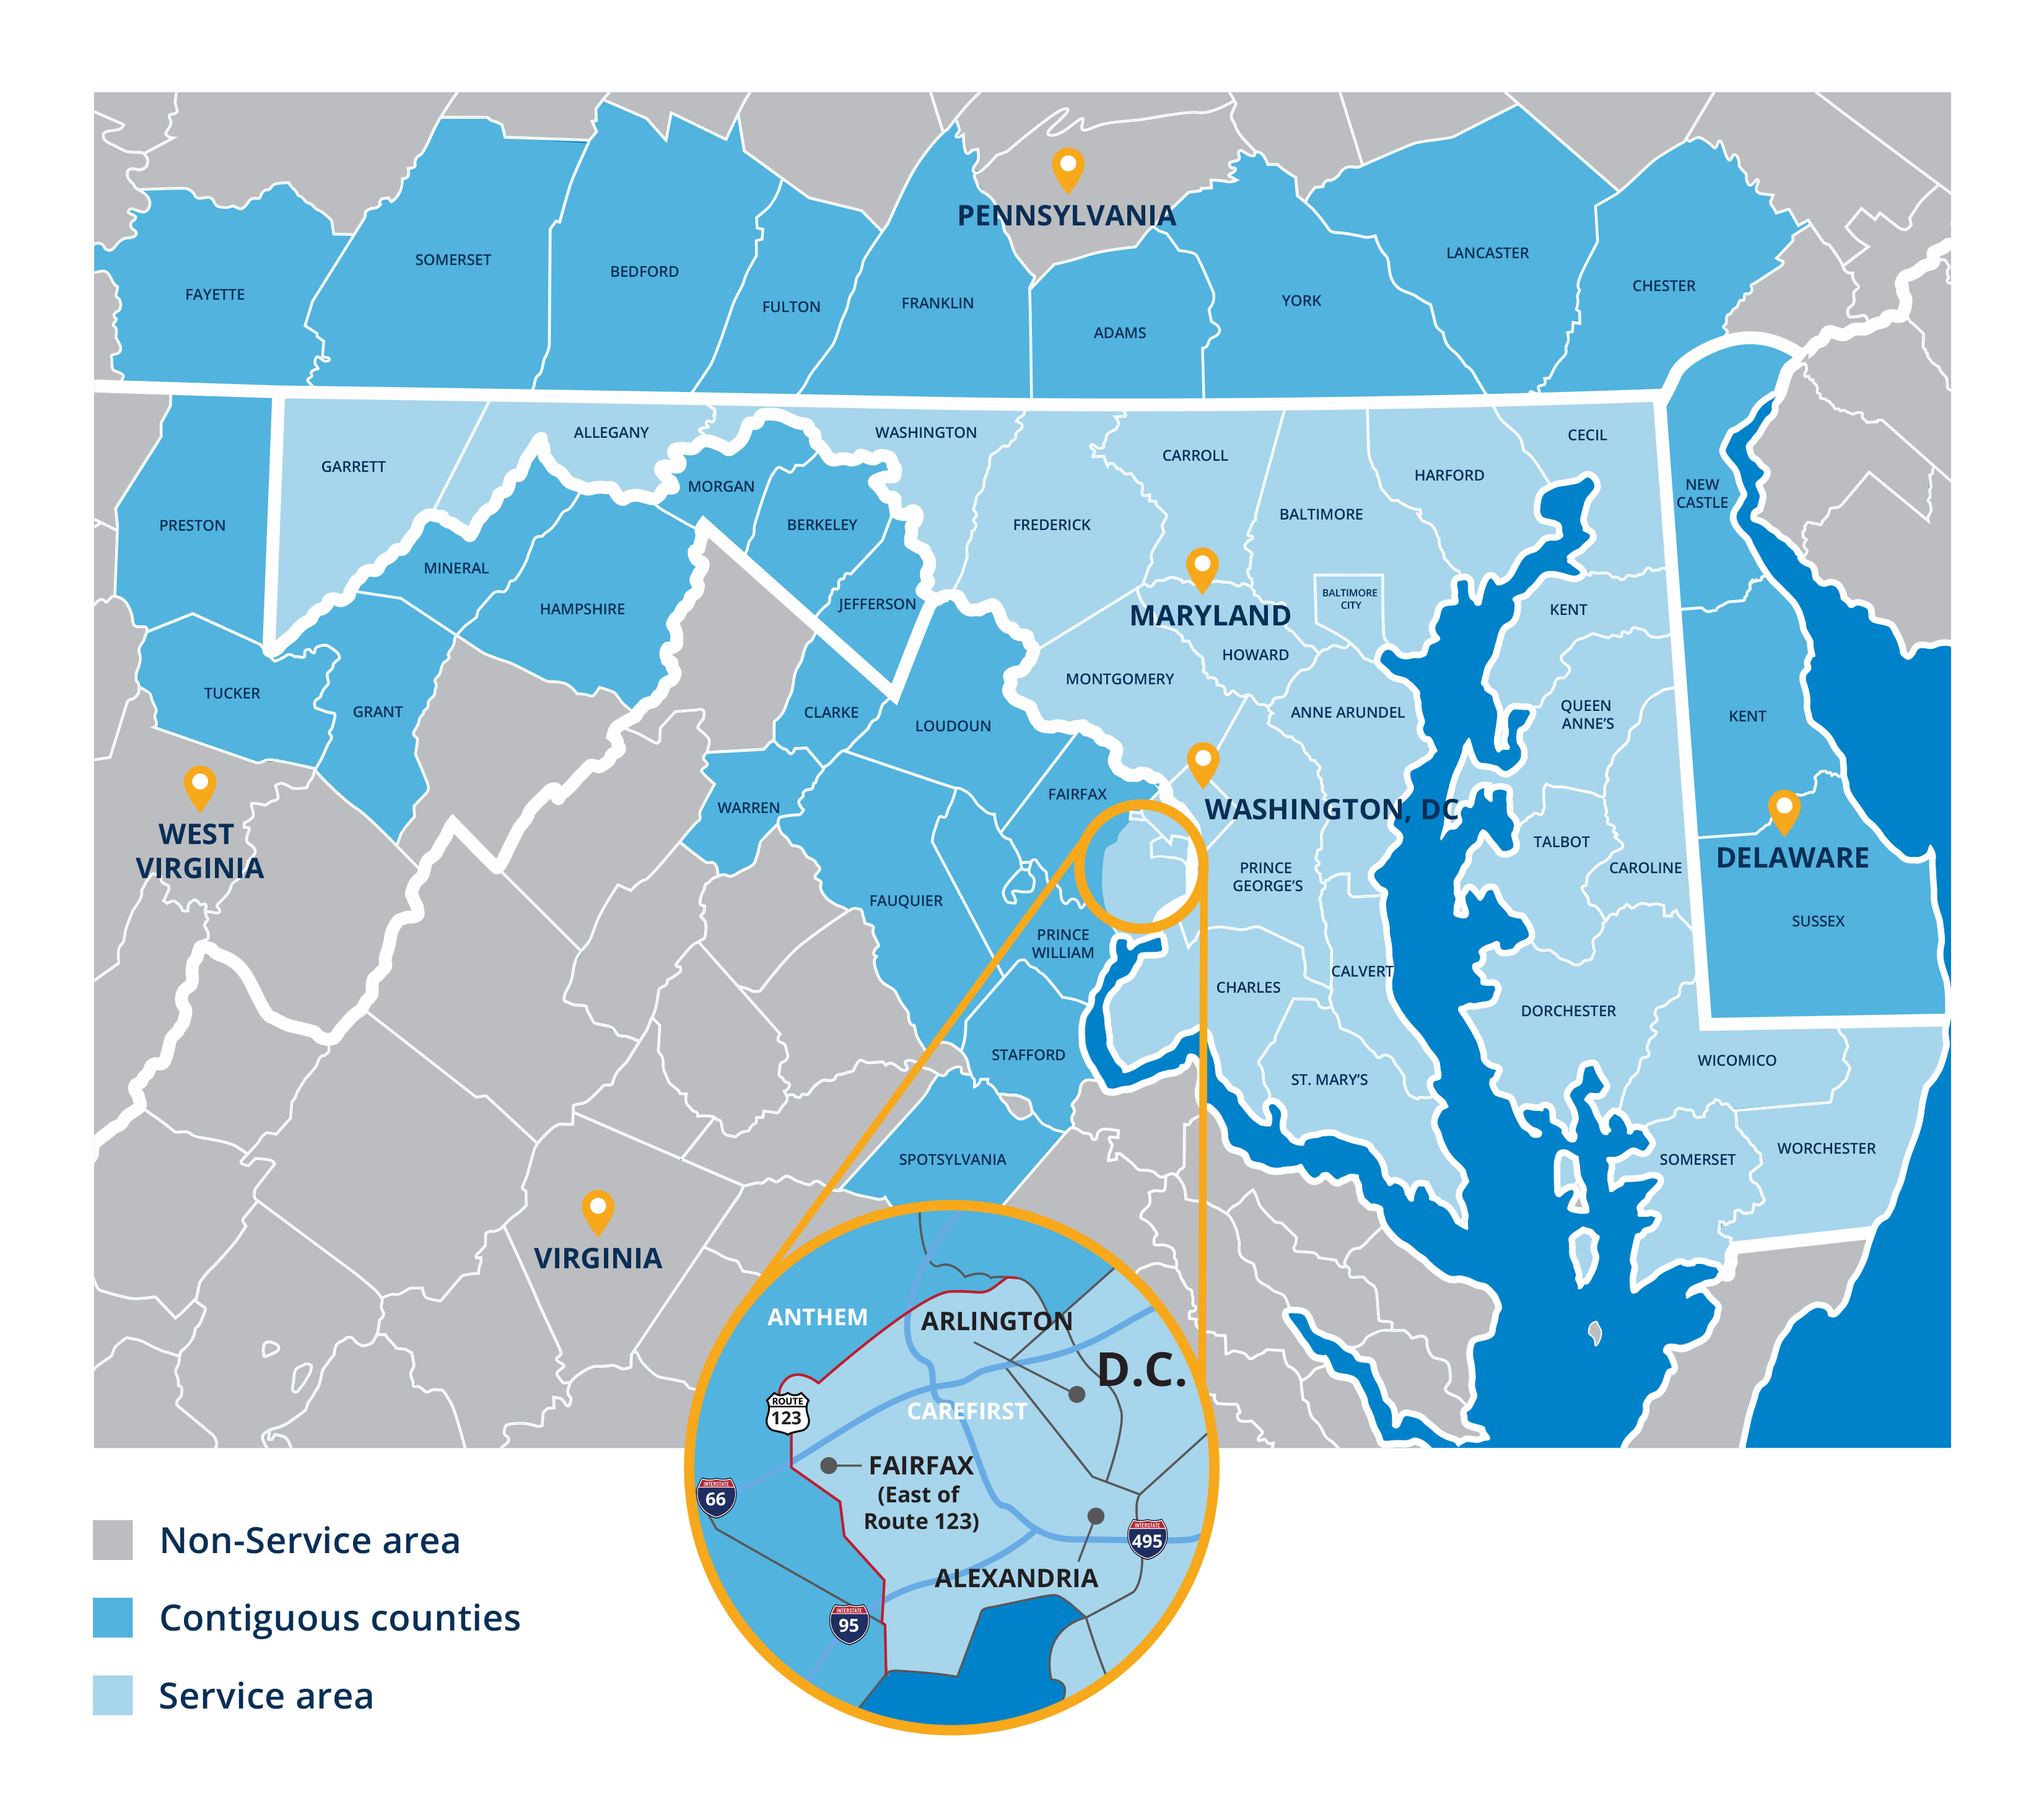 CareFirst BCBS service area map for MD, DC, VA